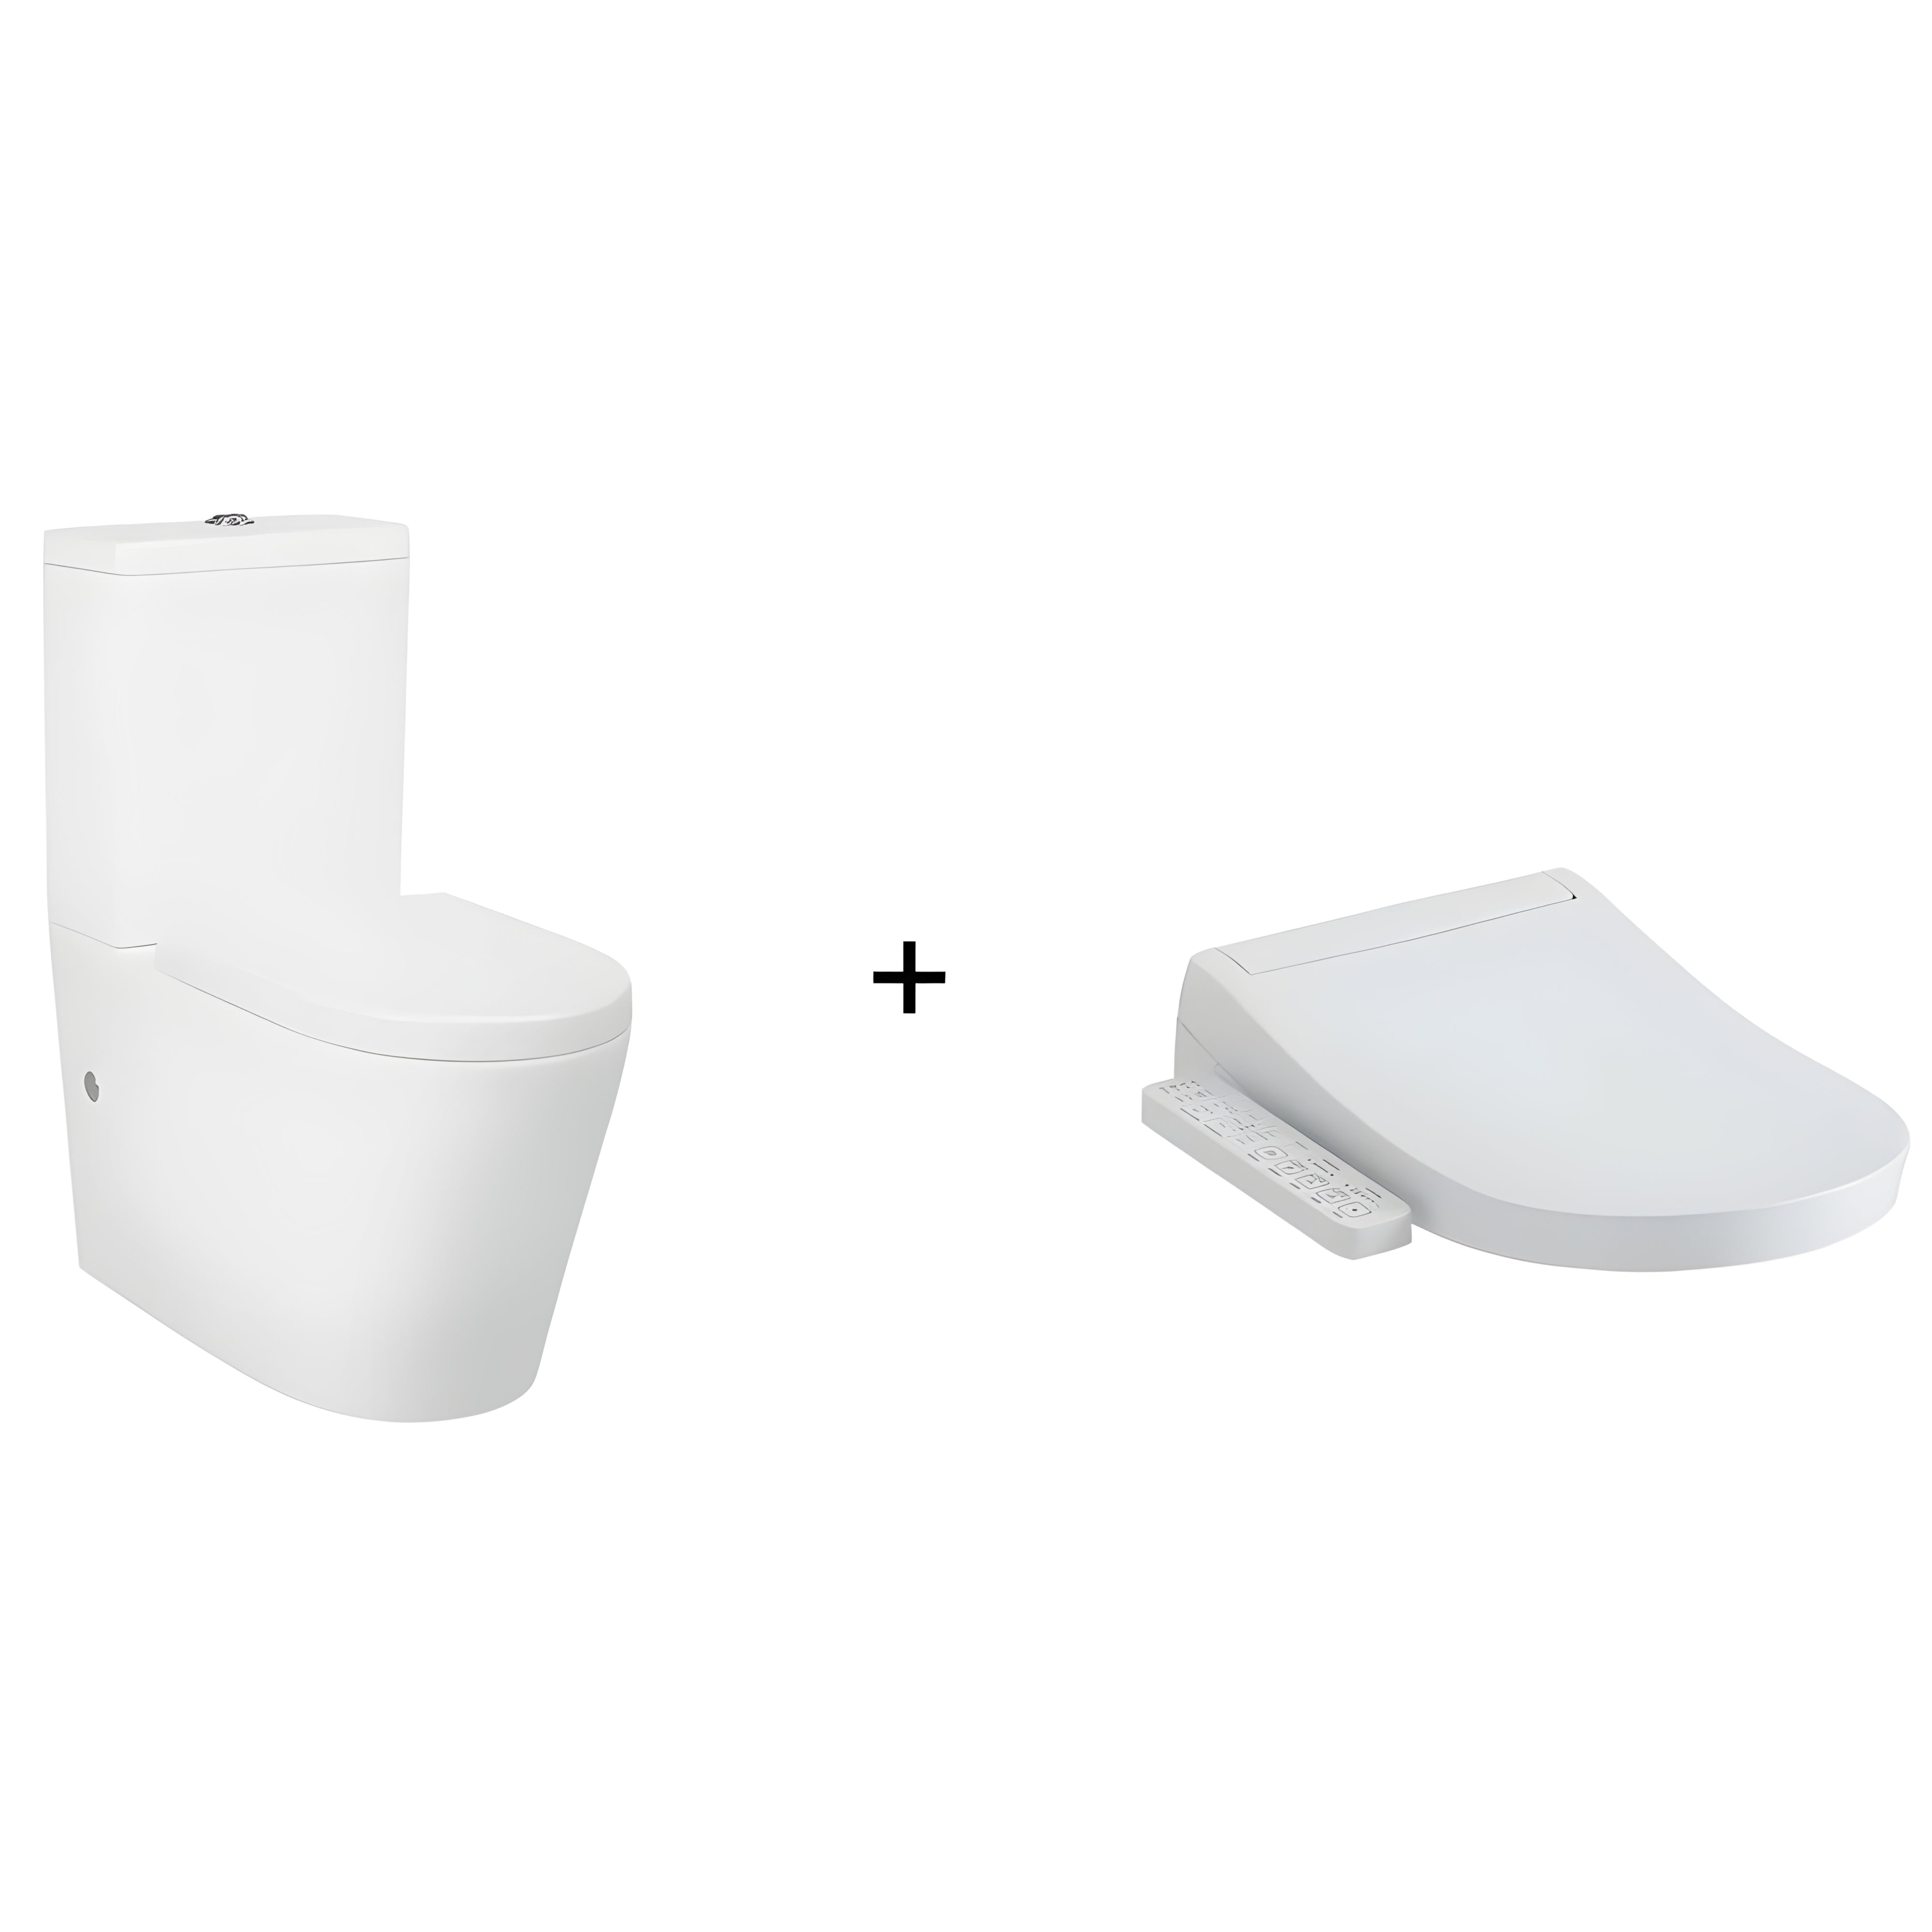 TOTO S2 WASHLET W/ SIDE CONTROL AND RIMLESS BTW TOILET SUITE PACKAGE D-SHAPED GLOSS WHITE